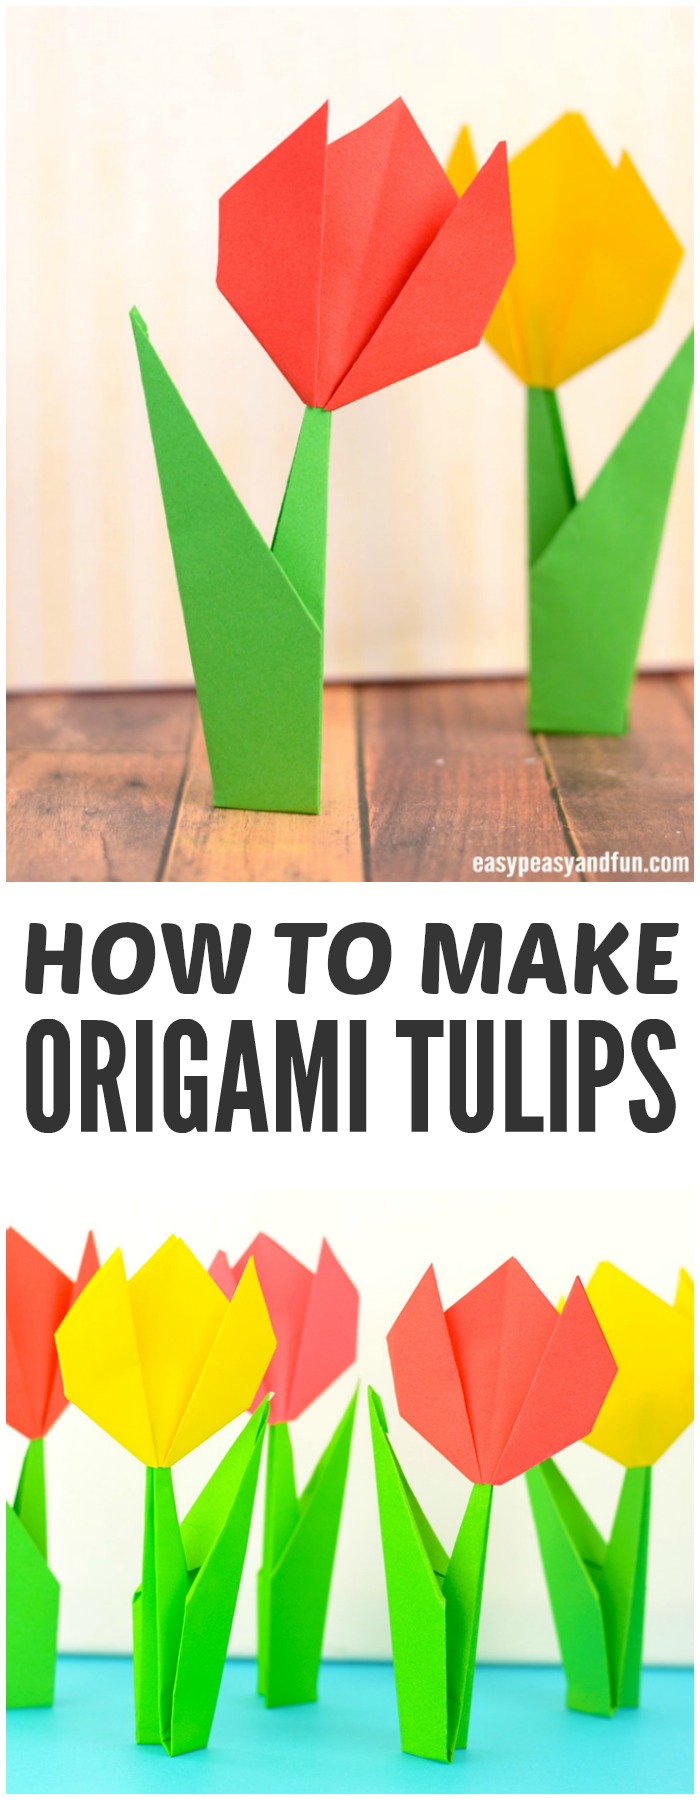 How to make origami flowers.  Step-by-step instructions for making origami tulips.